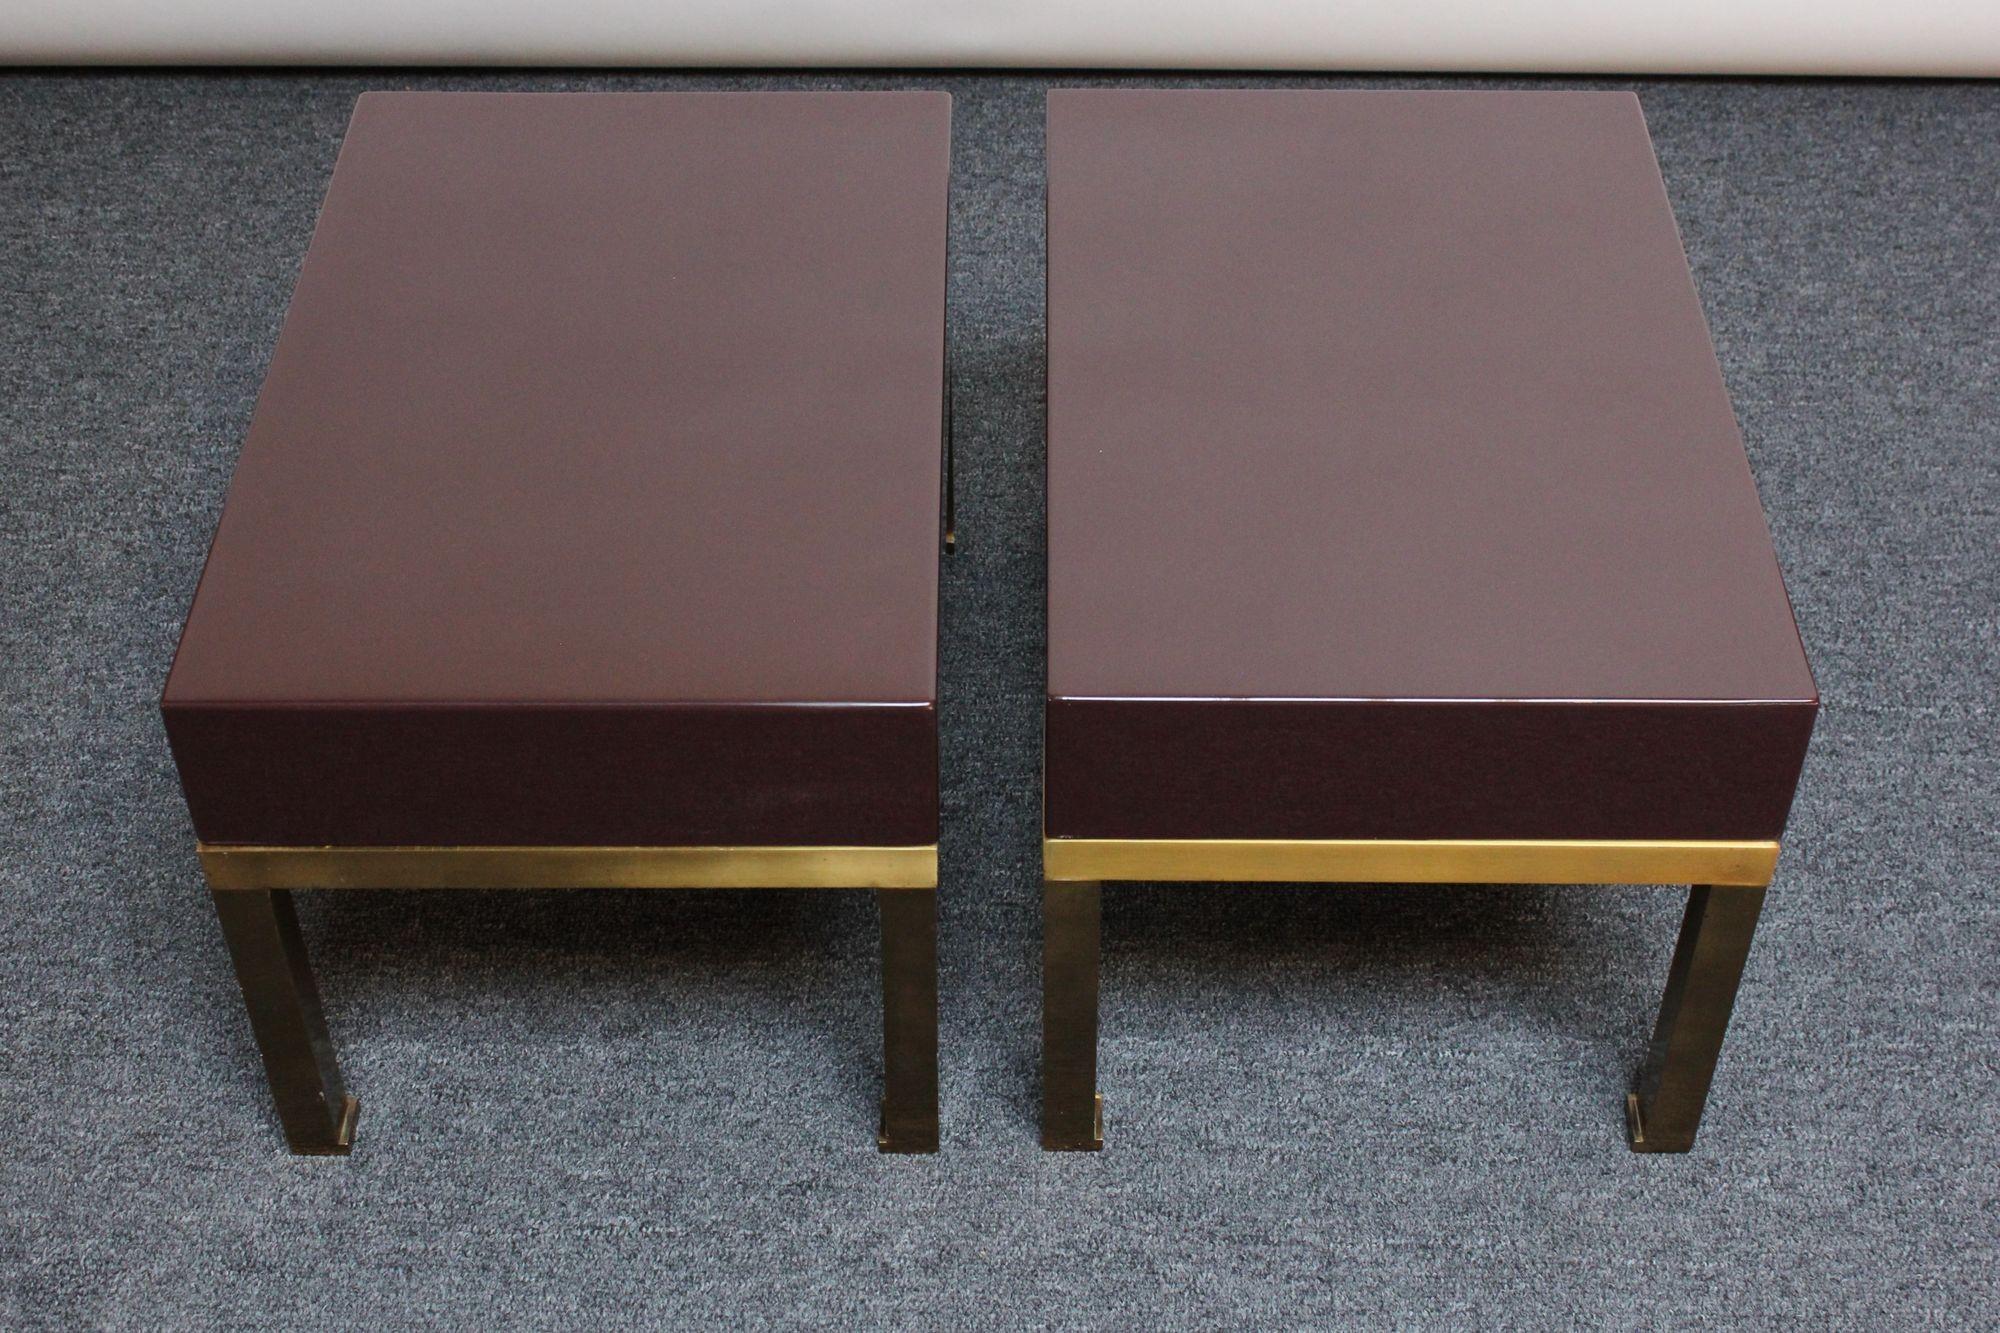 Pair of French Moderne Lacquered Mahogany and Brass Nightstands by Guy Lefèvre For Sale 3